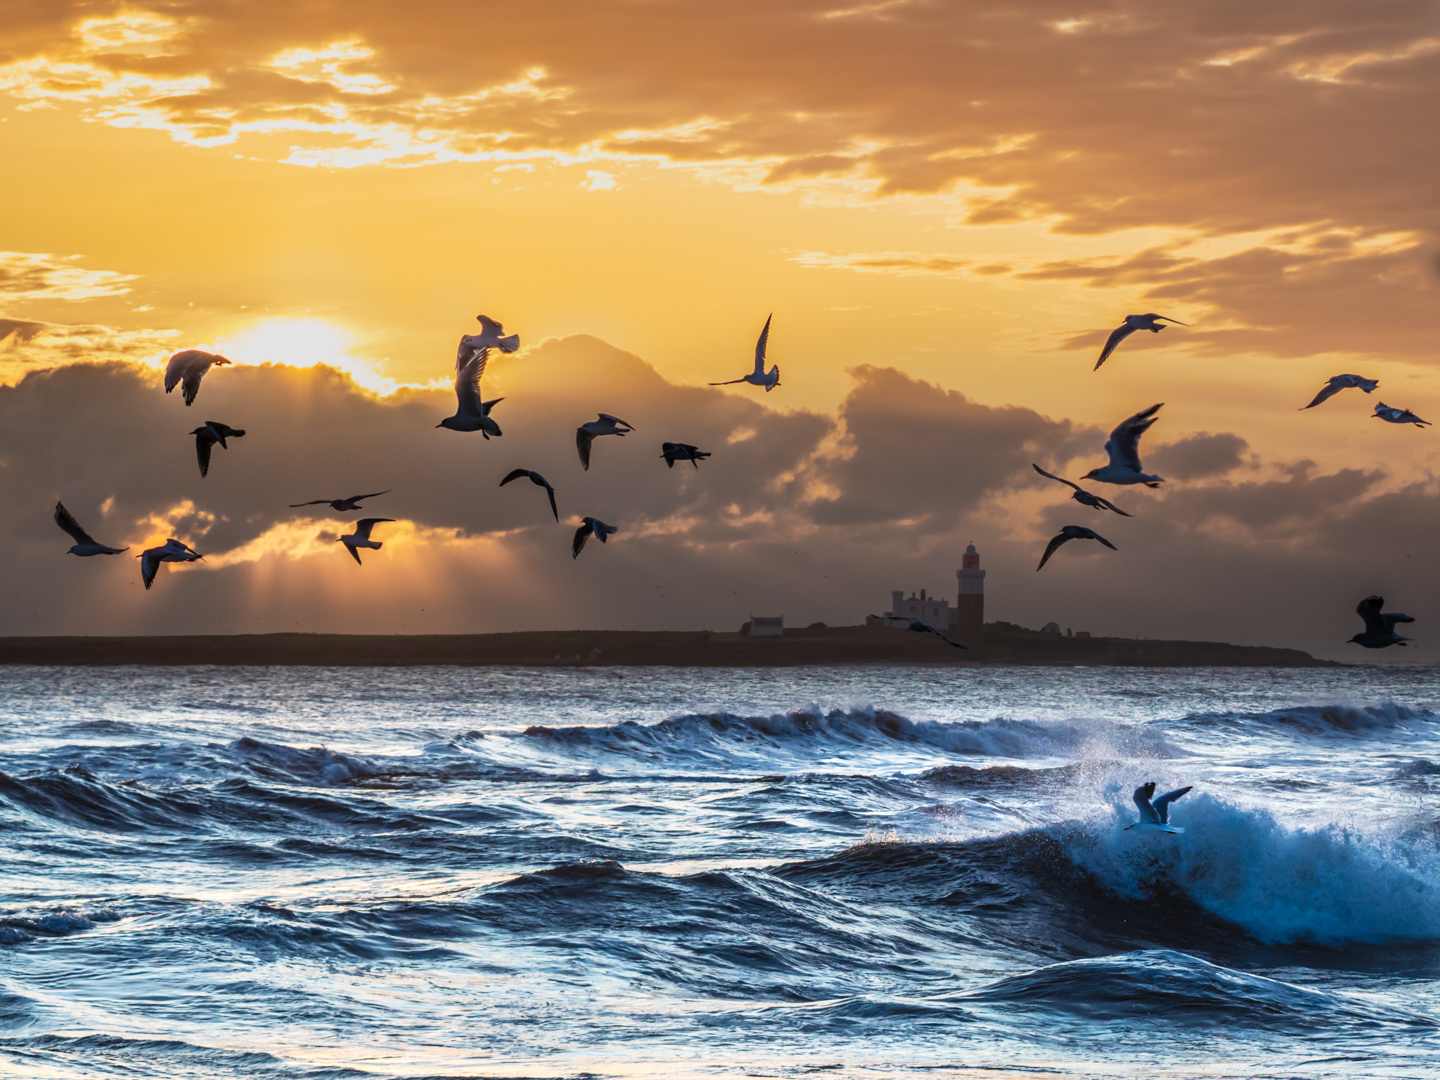 Gulls over the sea at sunrise, and image from Ivor's galleries